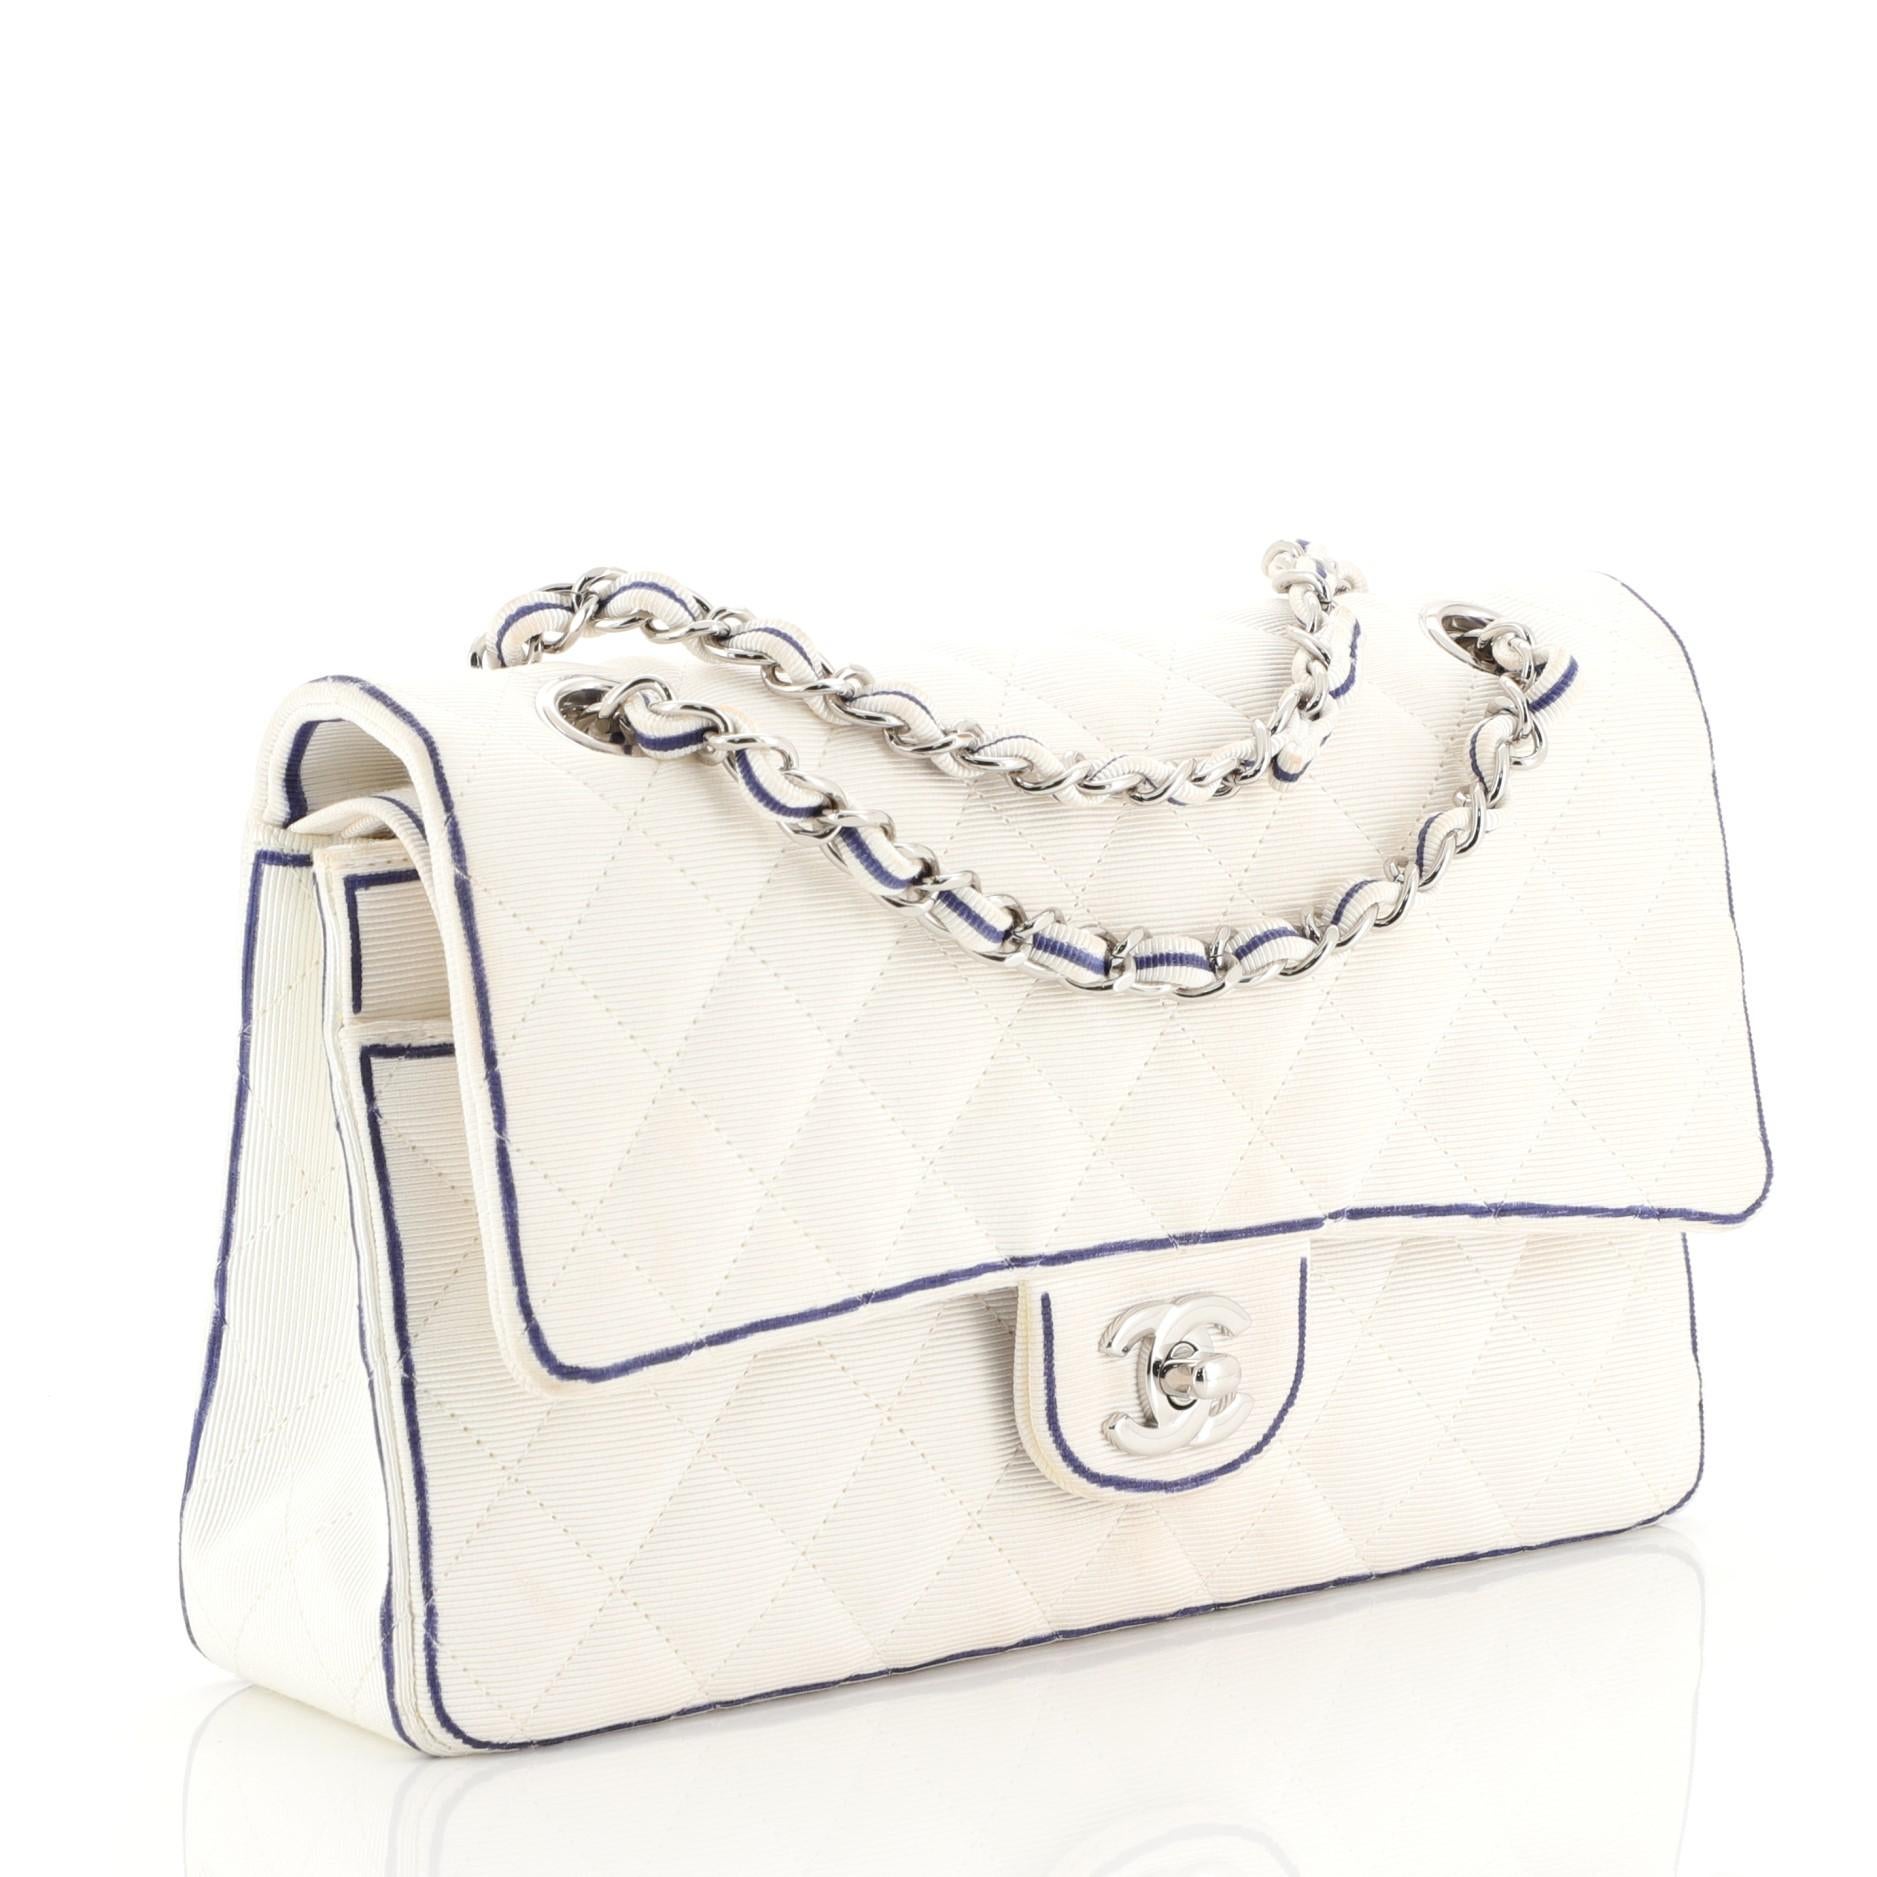 This Chanel Classic Double Flap Bag Quilted Grosgrain Medium, crafted from white quilted grosgrain, features woven-in fabric chain strap, exterior back pocket, and silver-tone hardware. Its CC turn-lock closure opens to a white grosgrain interior